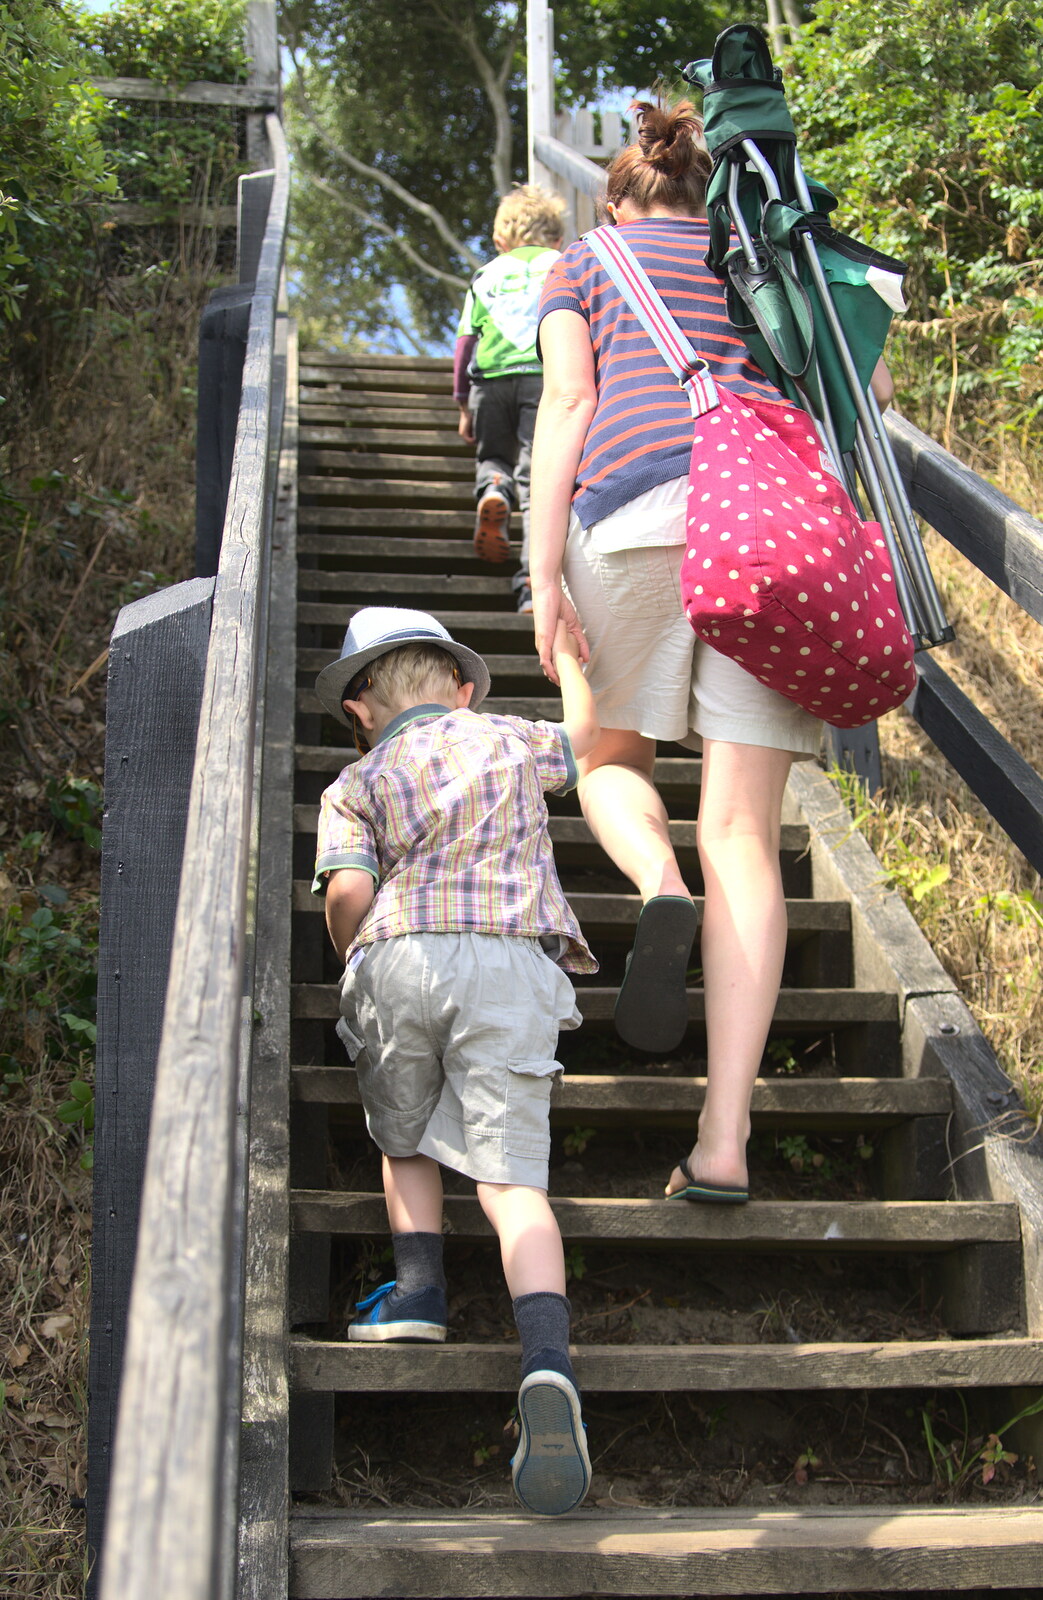 Harry and Isobel stump up the cliff steps from The Archaeology of Dunwich: A Camping Trip, Dunwich, Suffolk - 1st August 2015